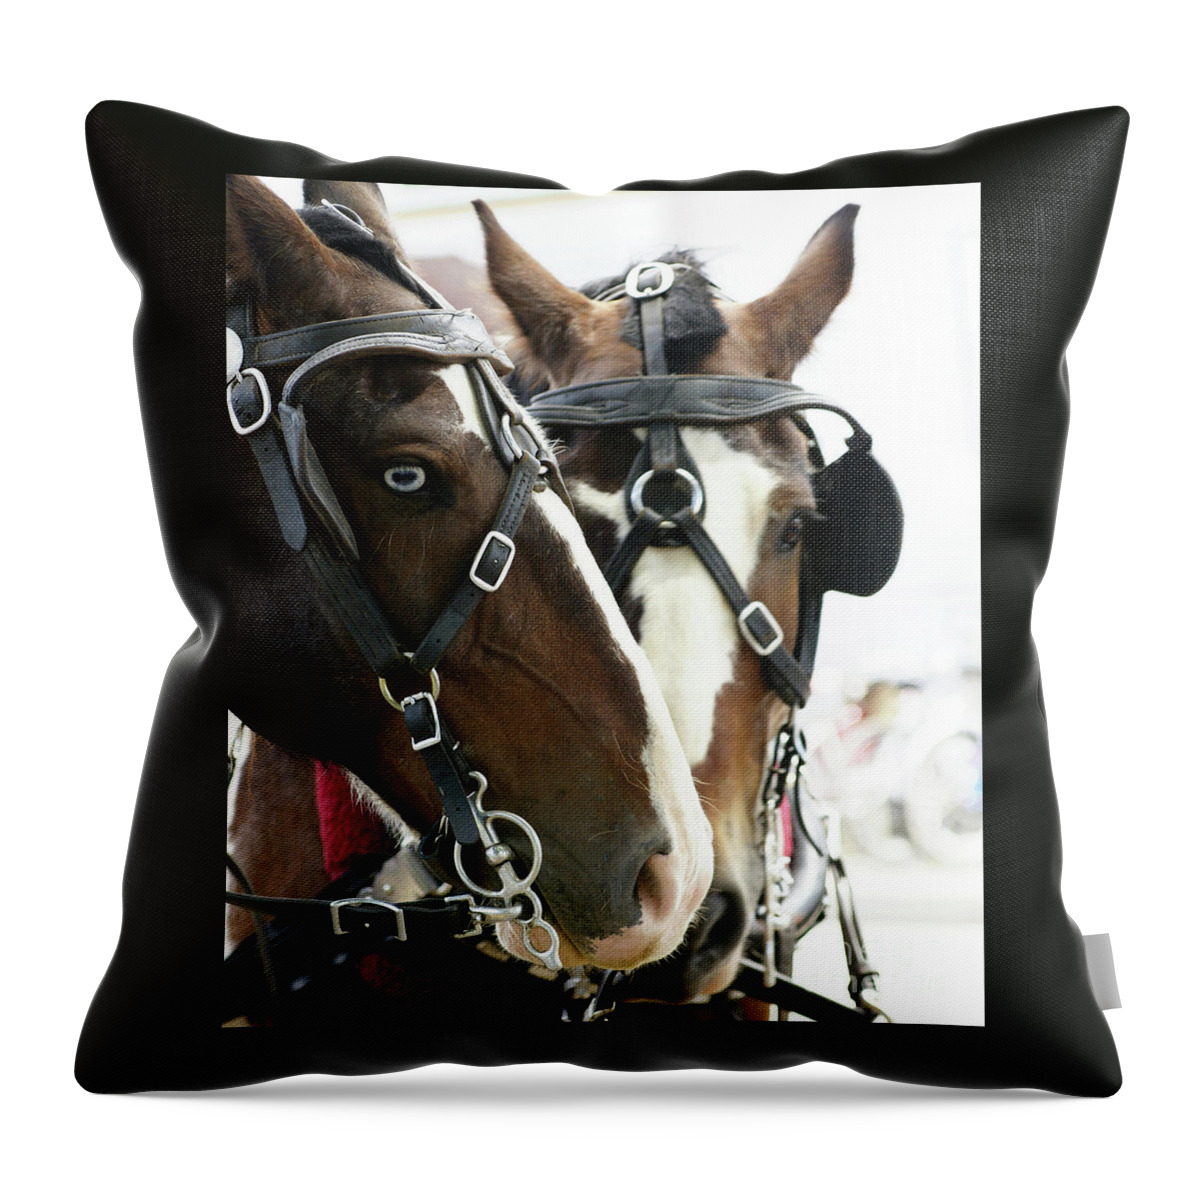 Carriage Throw Pillow featuring the photograph Carriage Horse - 4 by Linda Shafer